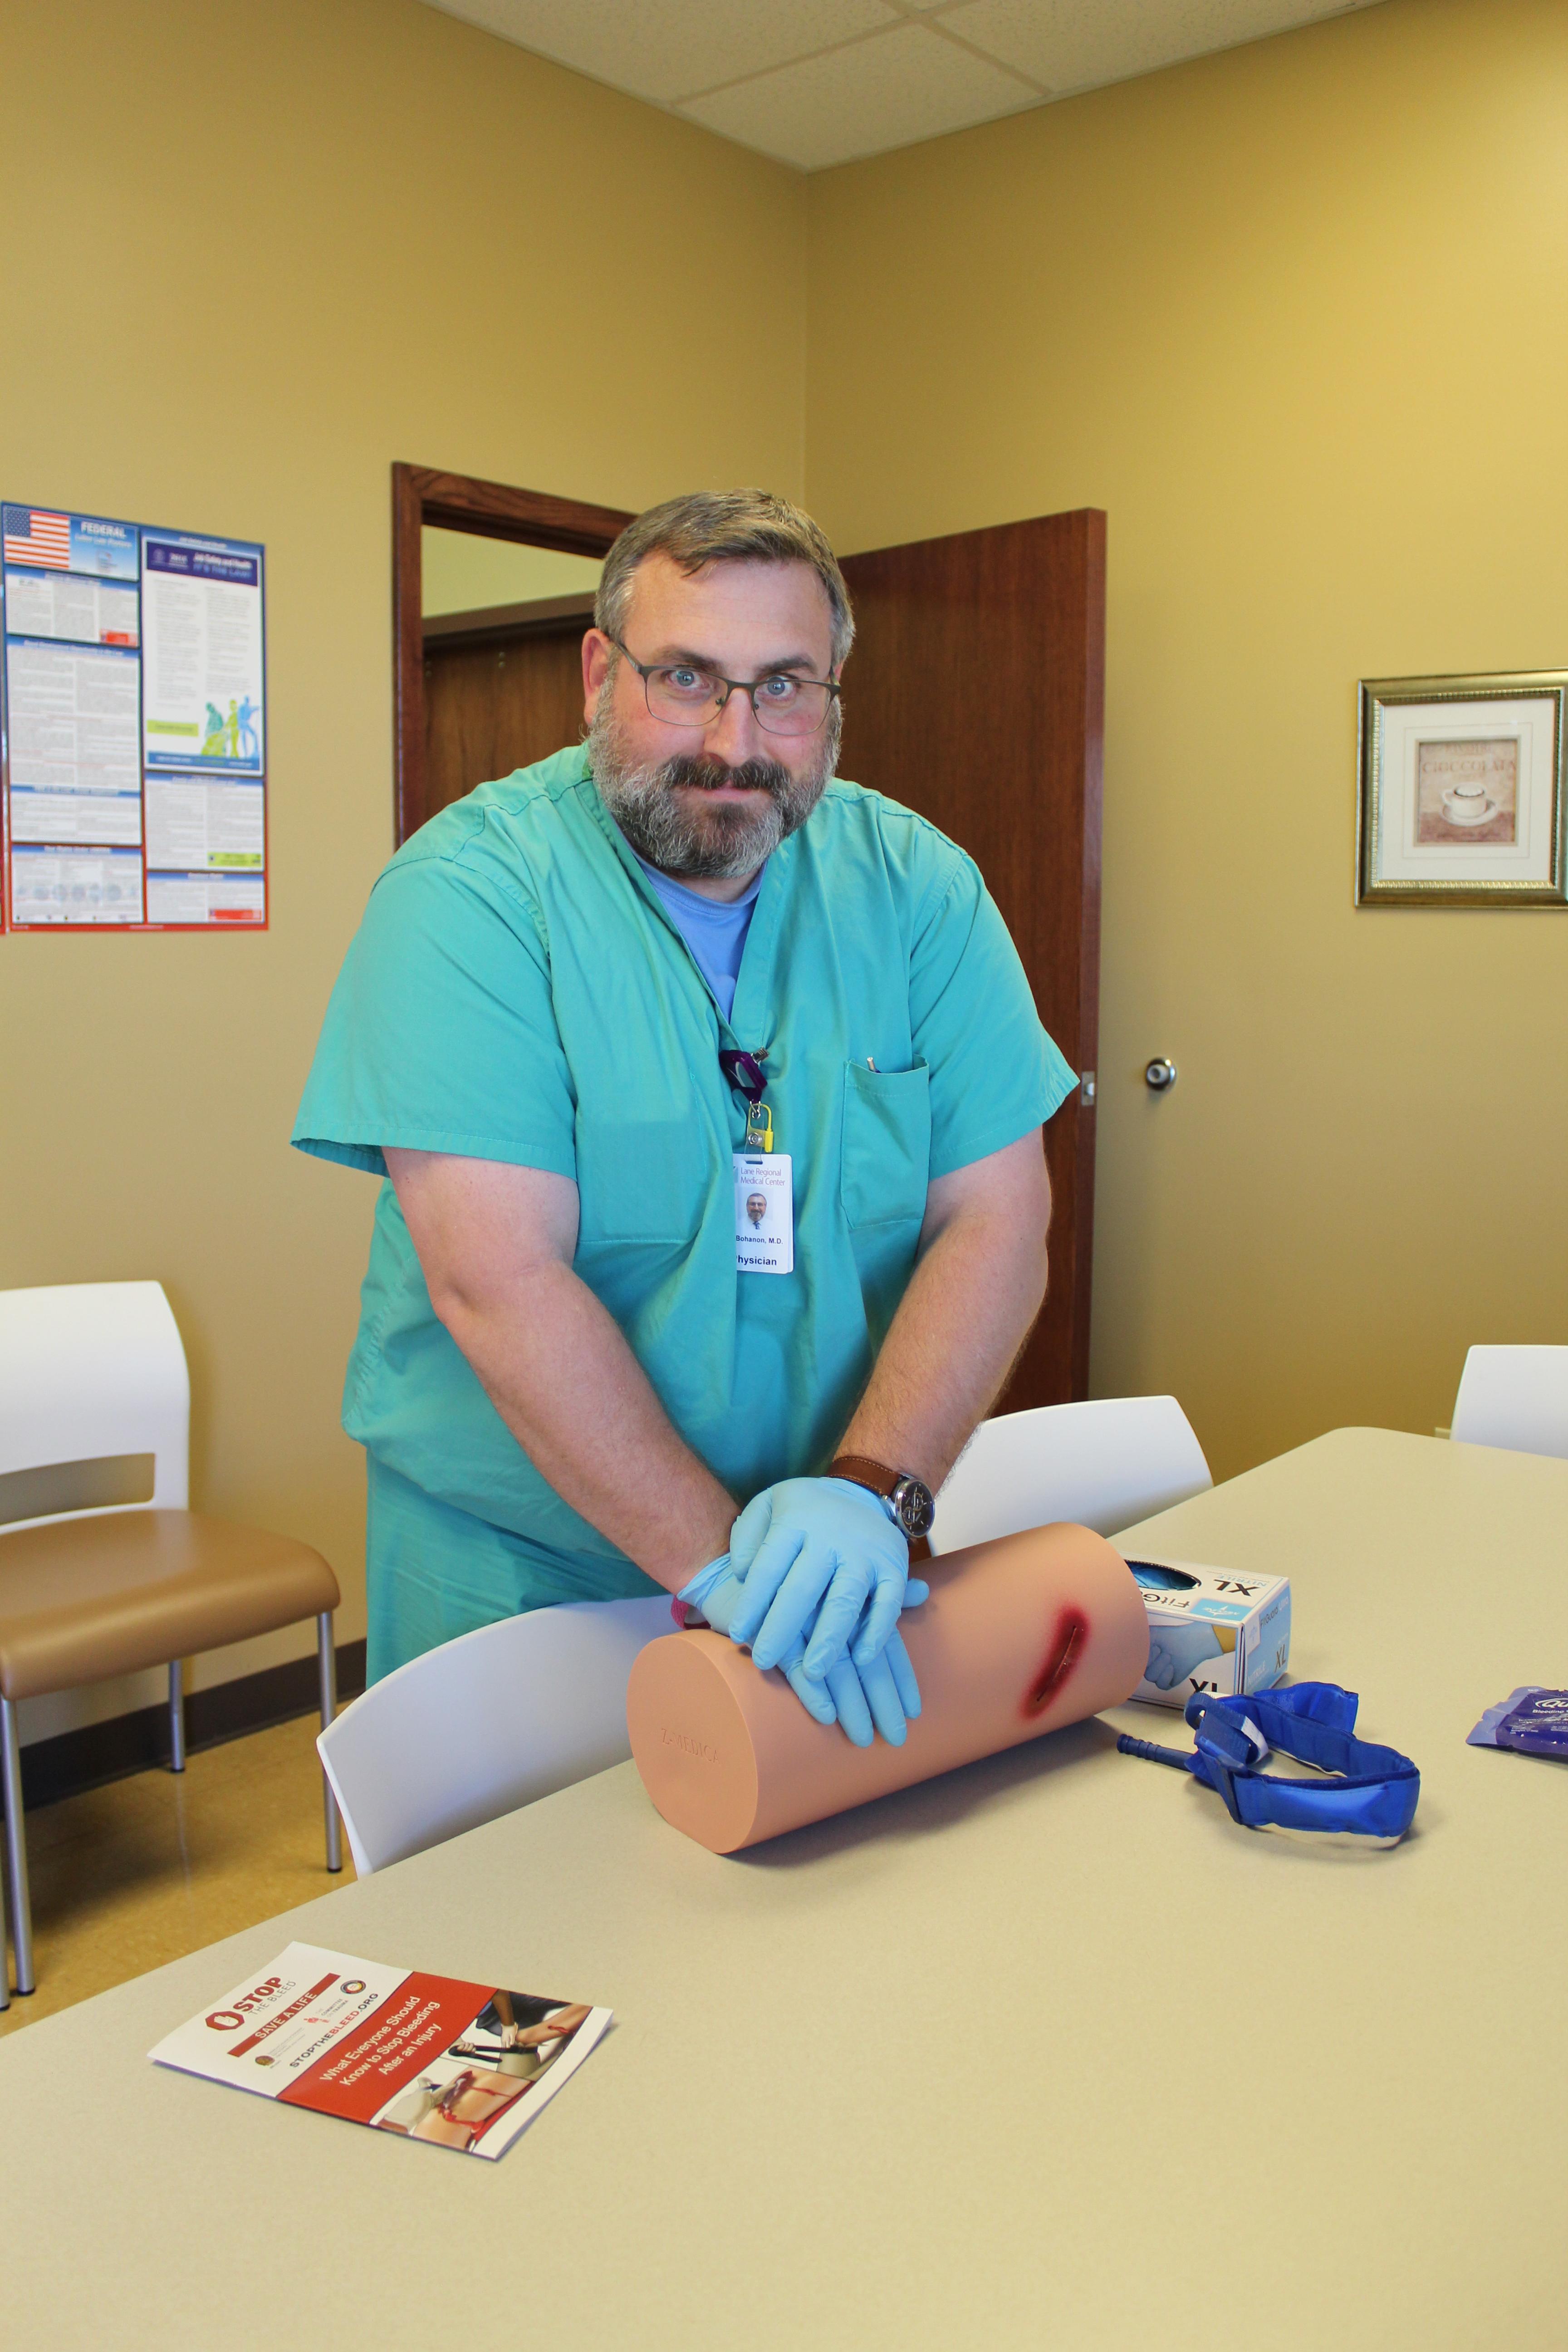 Free Stop the Bleed Training for Businesses and Organizations